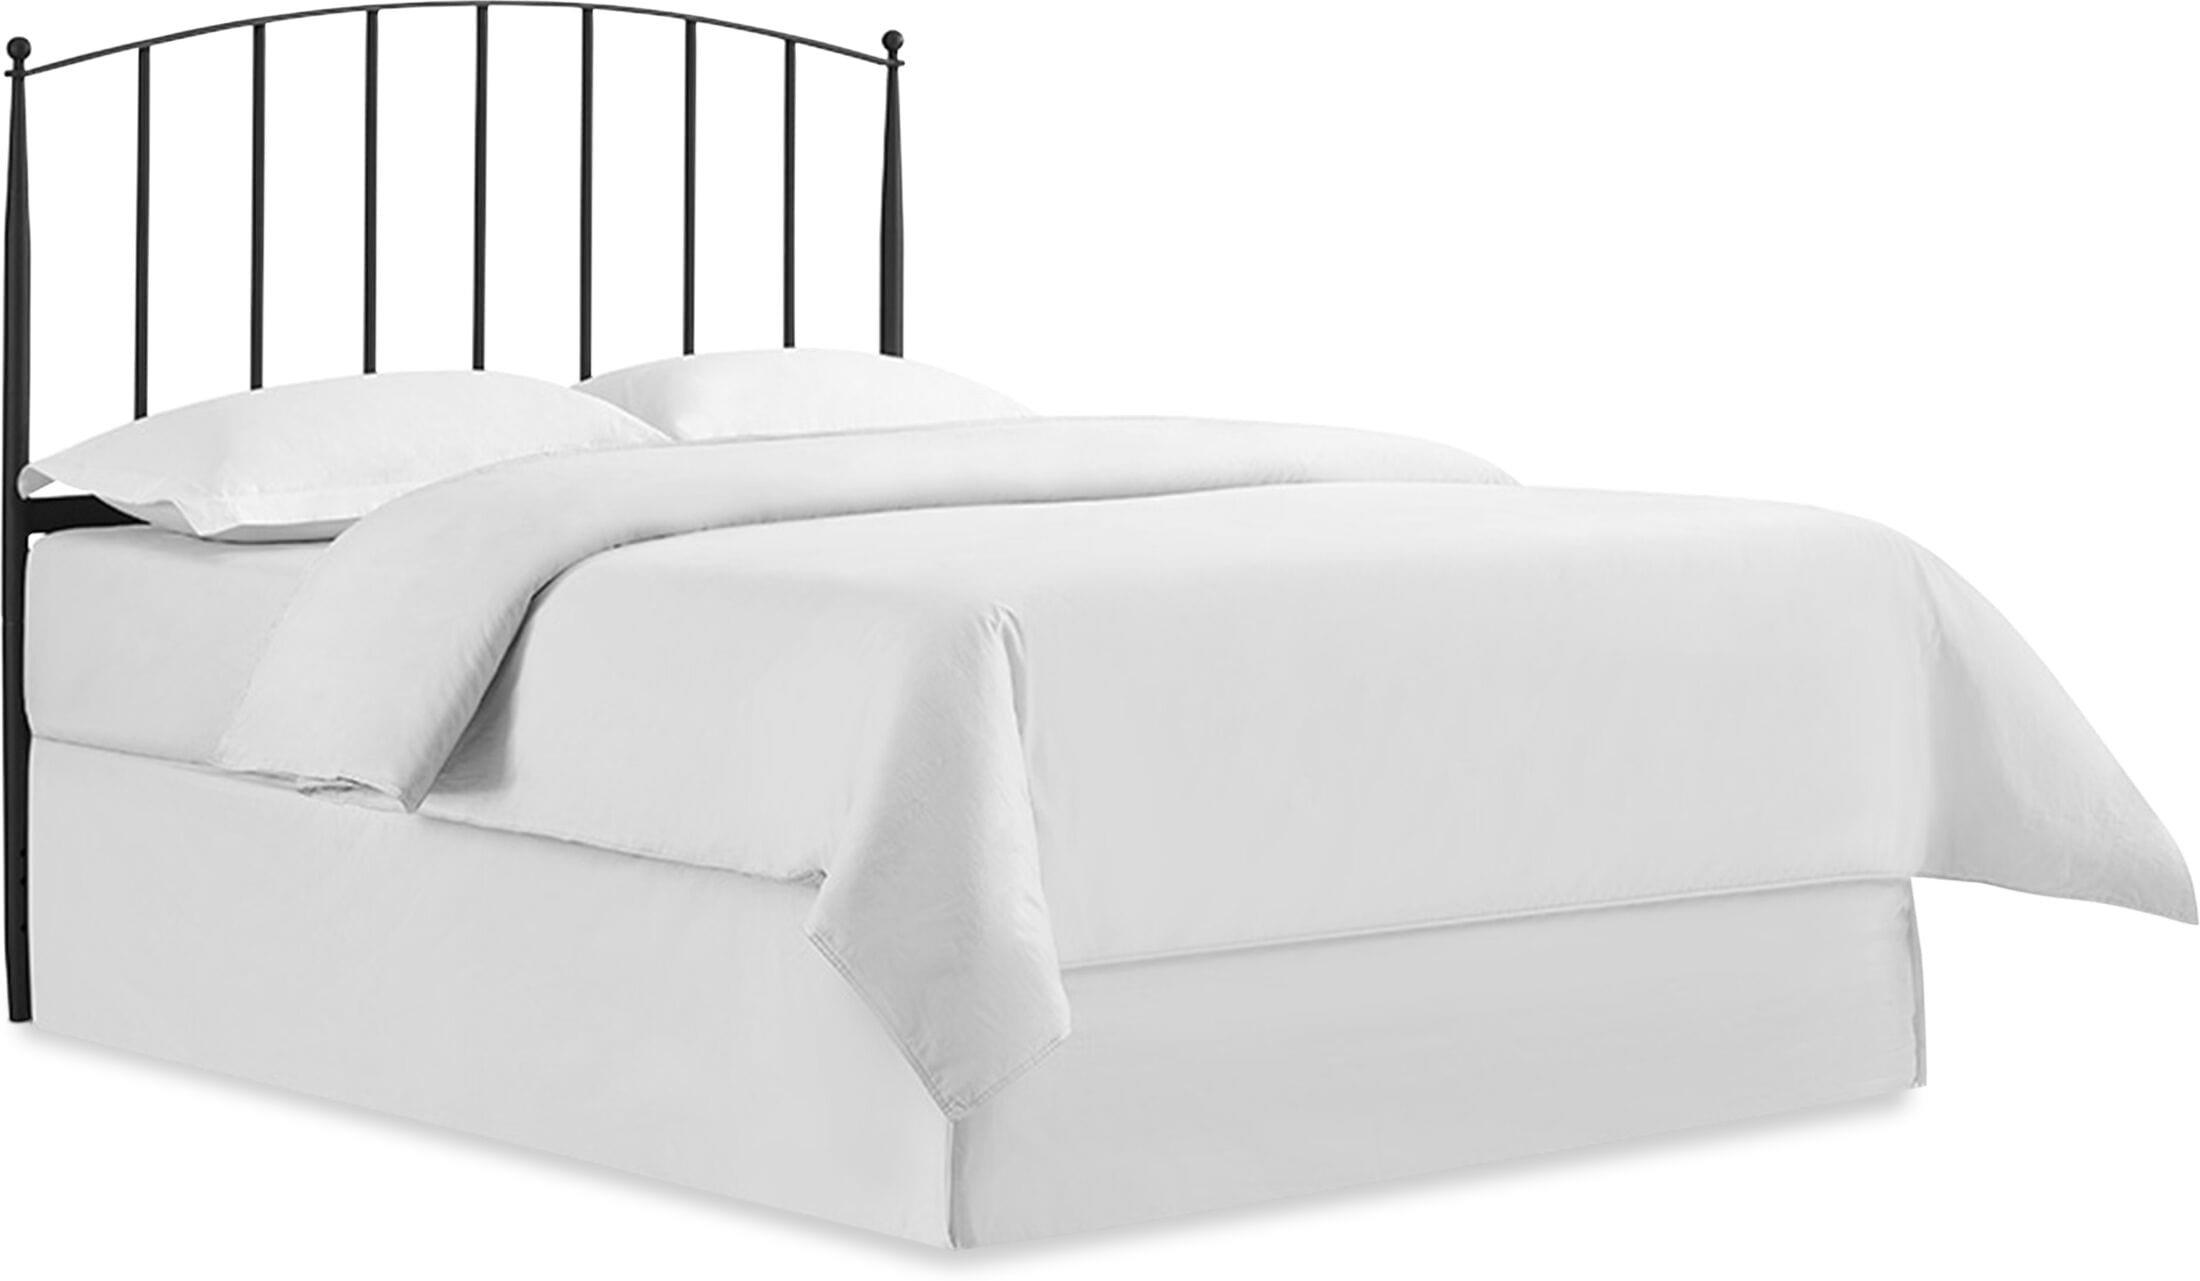 Undefined Value City Furniture, Value City Headboards